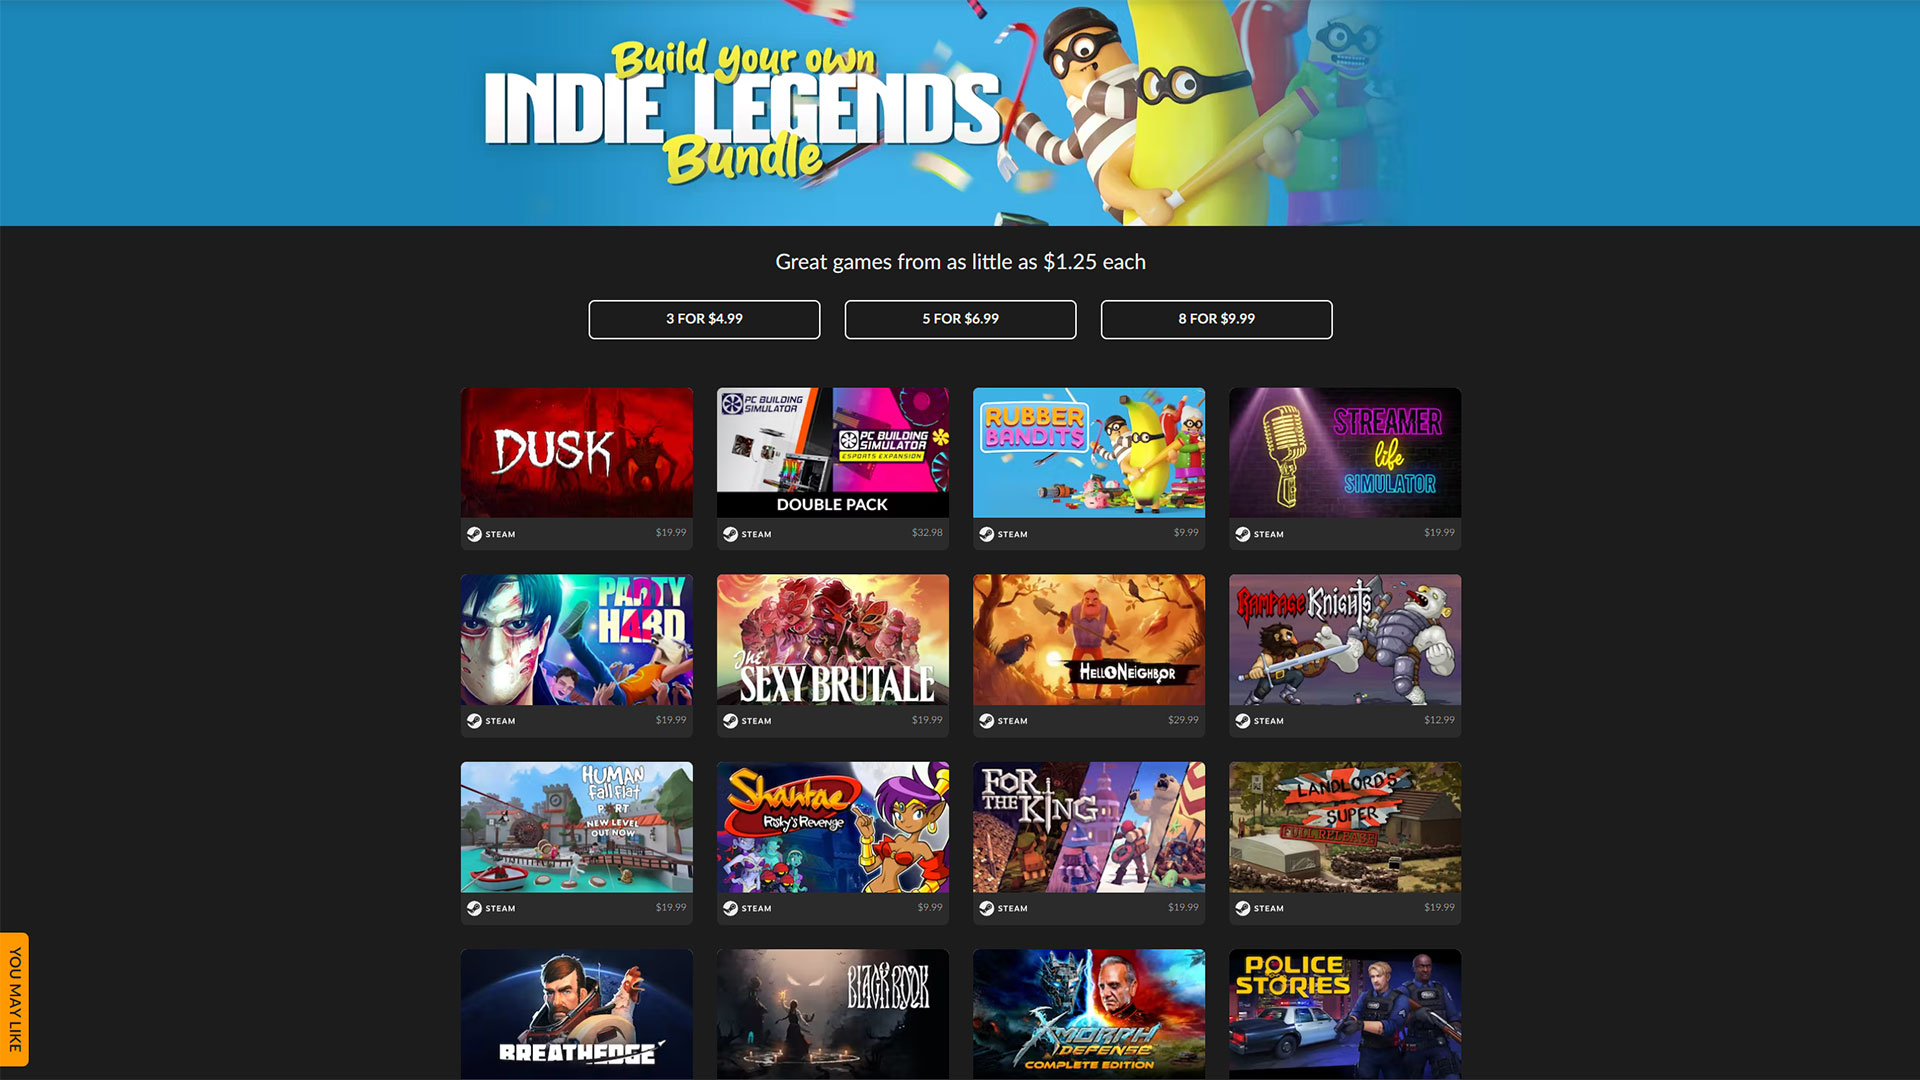 The Build Your Own Indie Legends Bundle at Fanatical gets you 8 games for $9.99